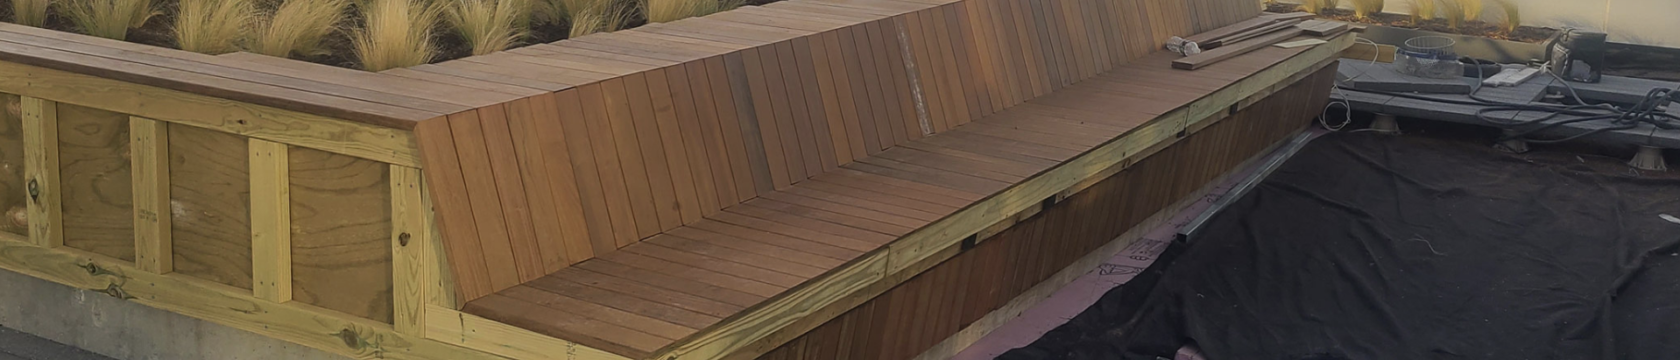 New Hotel Construction Financing Wooden Bench At A Rooftop